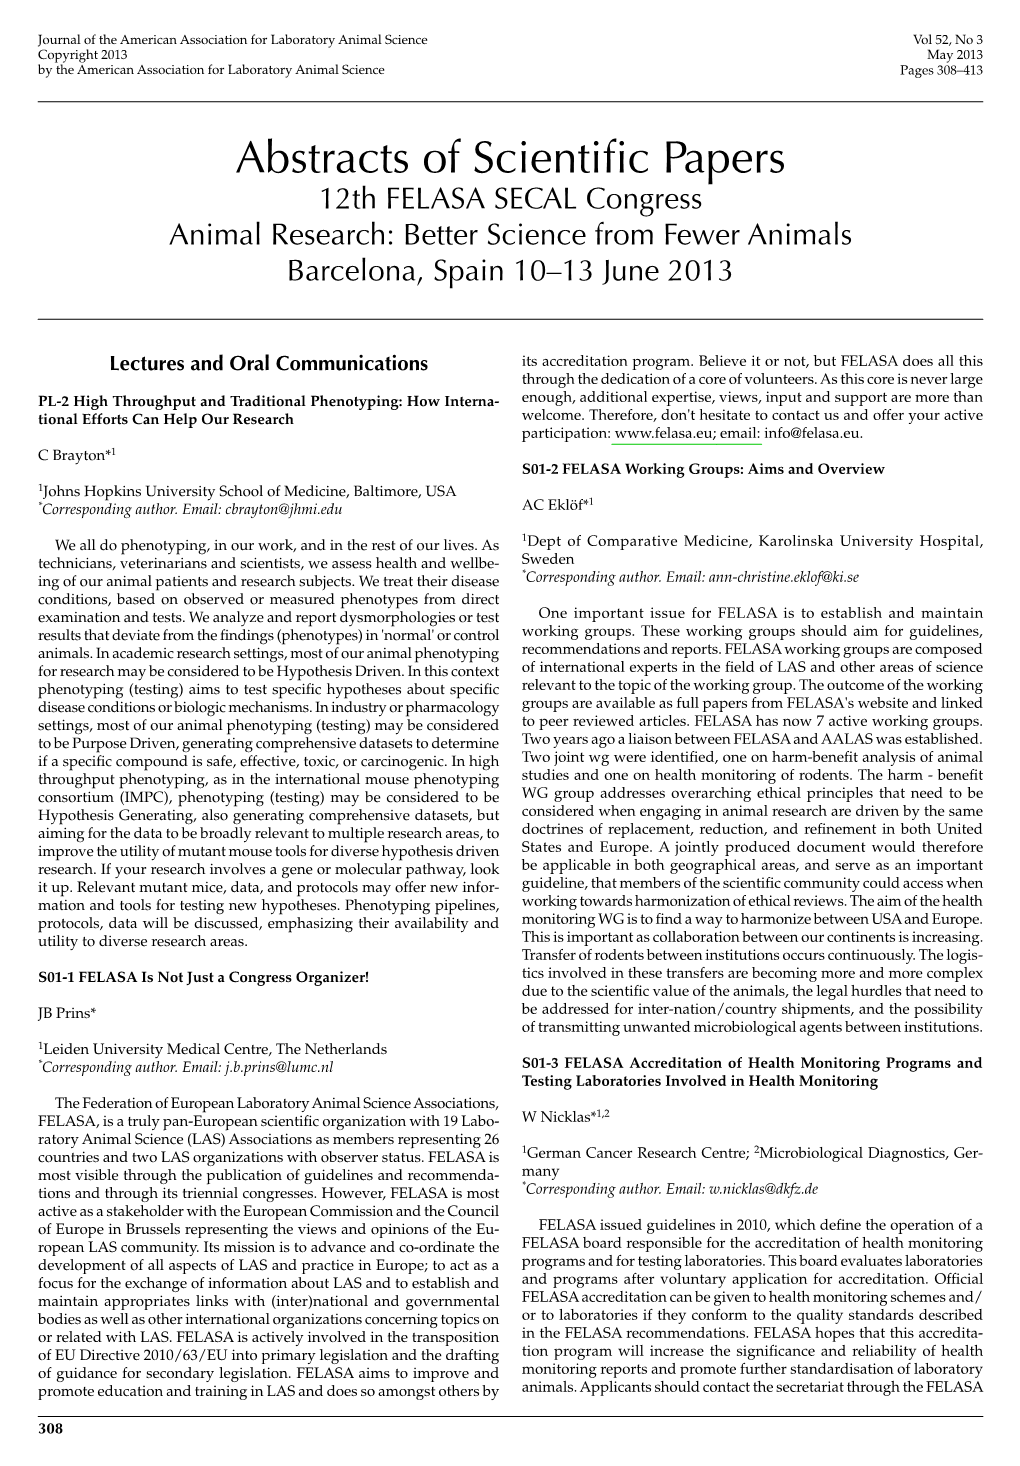 Abstracts of Scientific Papers 12Th FELASA SECAL Congress Animal Research: Better Science from Fewer Animals Barcelona, Spain 10–13 June 2013